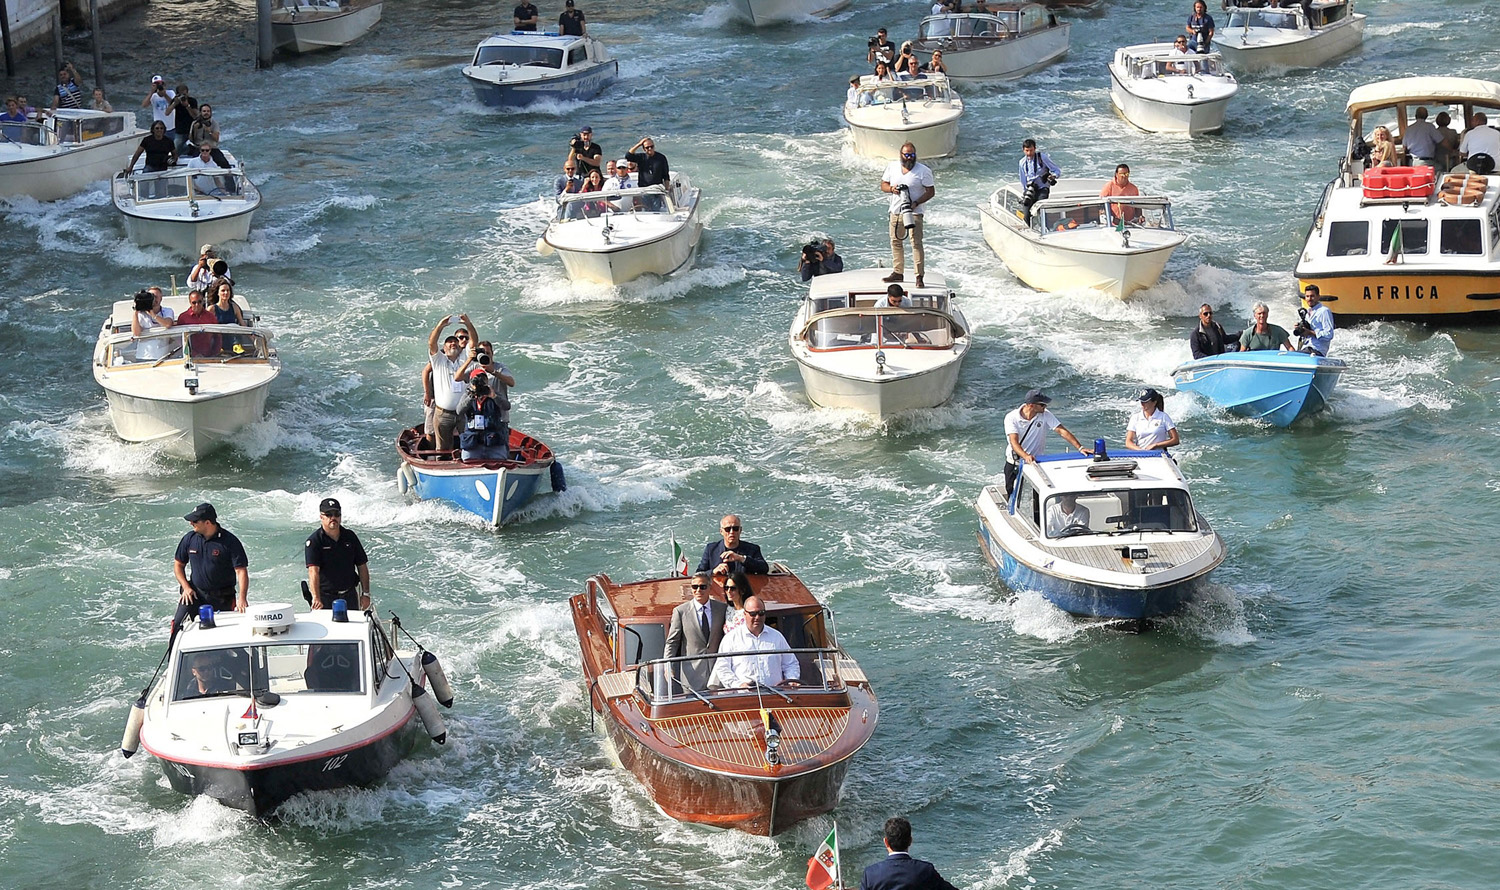 George Clooney and Amal
                              Alamuddin, a human-rights lawyer, are
                              followed by more than a dozen boats holding
                              security and media after leaving a hotel in
                              Venice on Sept. 28; they had wedded the day before.